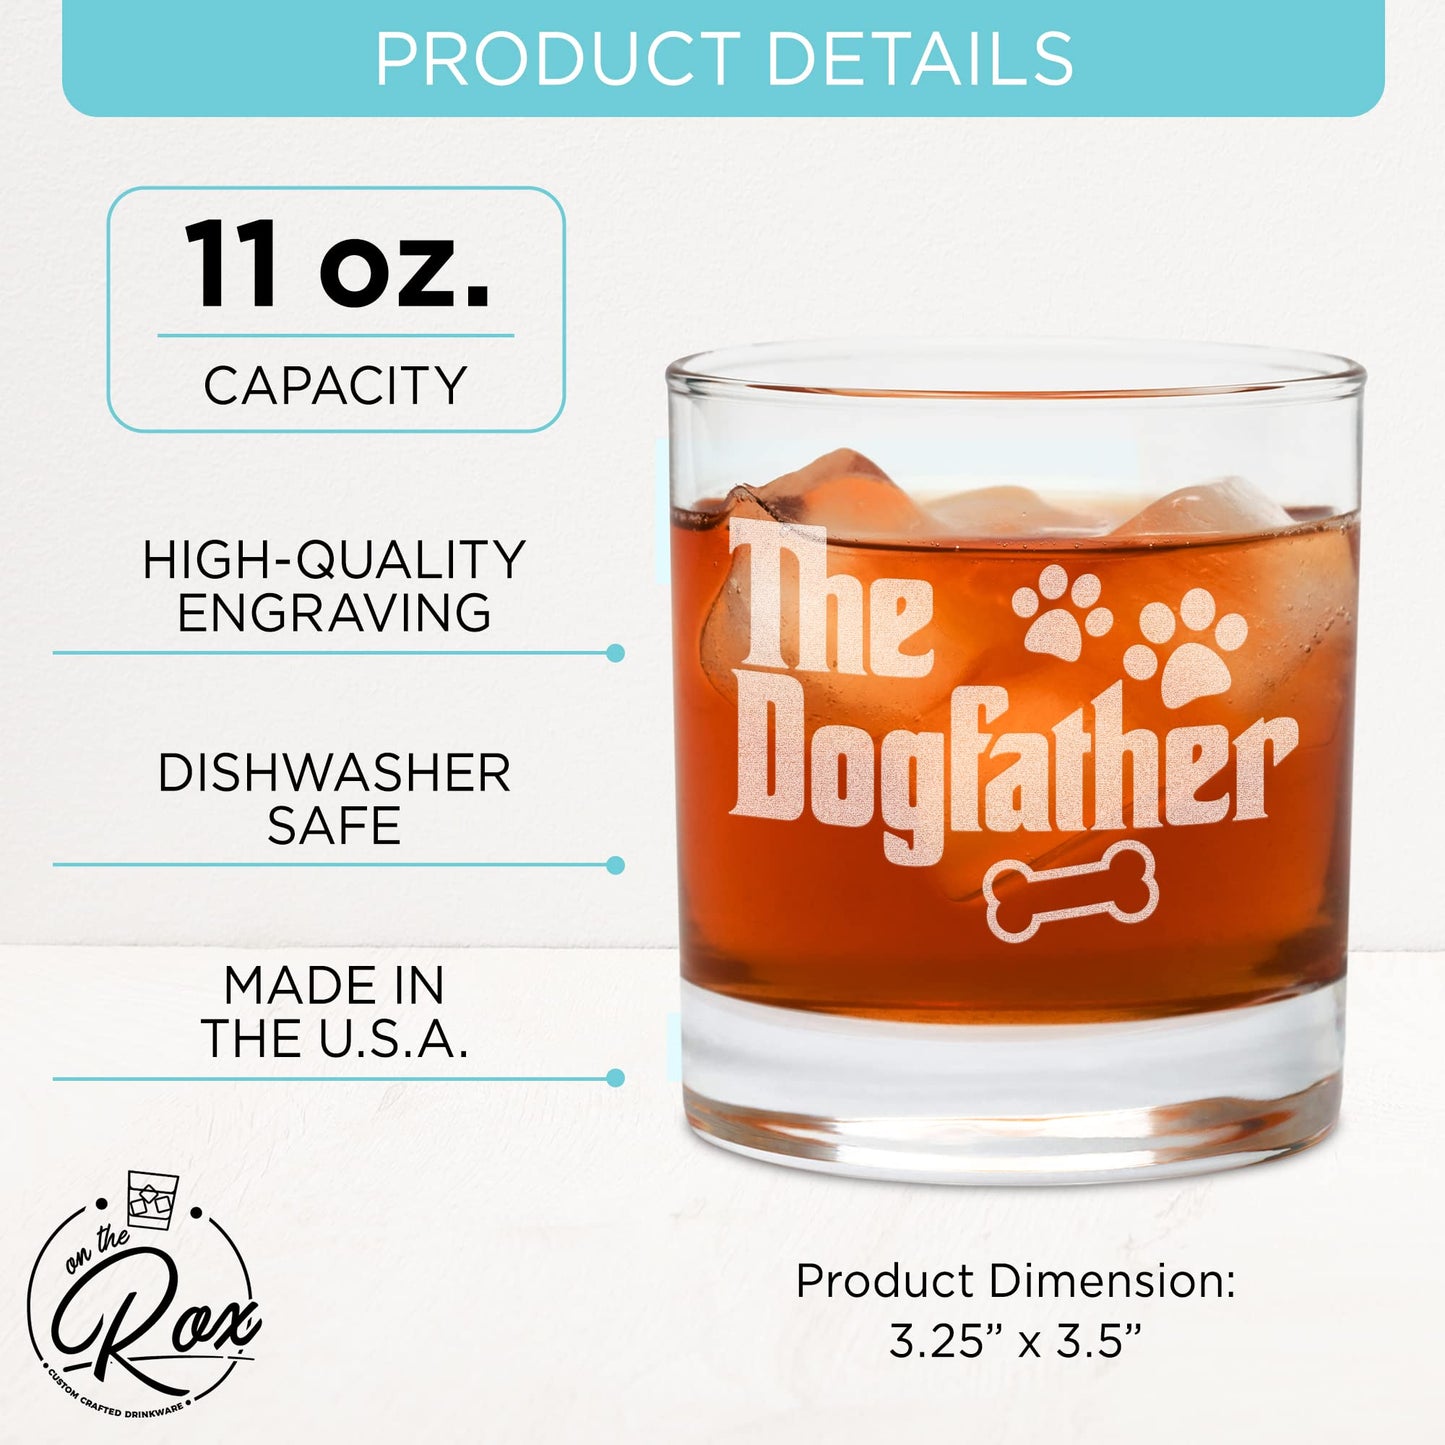 Whiskey Gifts for Dad- 11 Oz "Dog Father" Engraved Whiskey Glass - Father's Day Gift, Dad Birthday Gifts From Daughter, Wife or Son - Dad Bourbon Glass - Old Fashion Glass - 6 Designs To Choose From